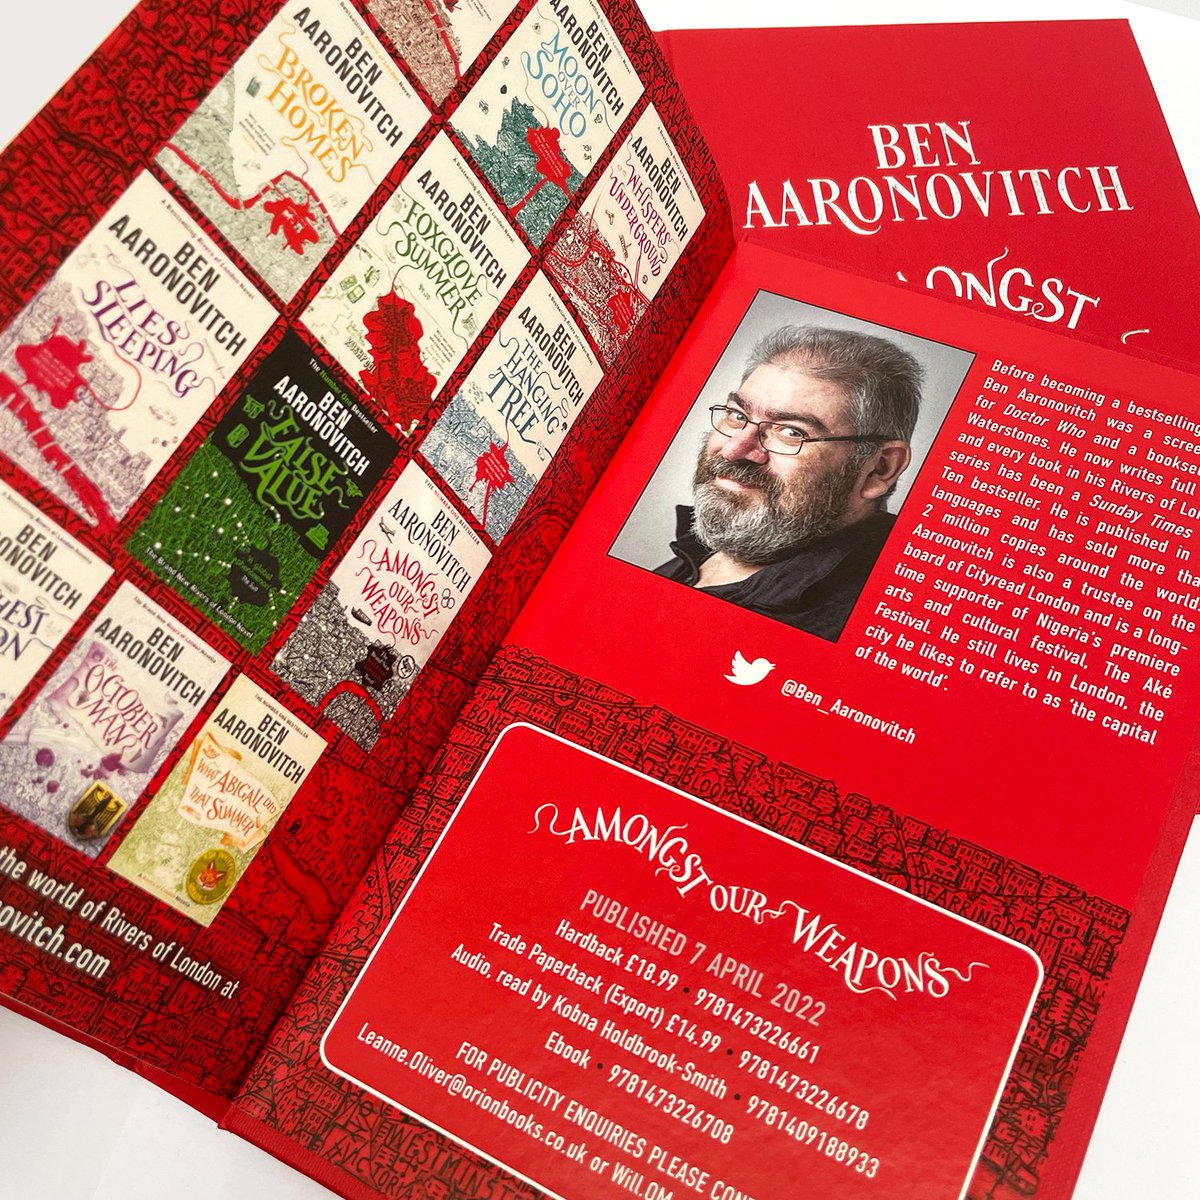 Fancy getting your hands on one of the super limited edition proofs of #AmongstOurWeapons, the new Rivers of London novel from @Ben_Aaronovitch? We have 3 up for grabs - just retweet this post to enter! [18+, UK only, closes 11.59pm 13/3/22. Full T&Cs: bit.ly/AOWproofprize]